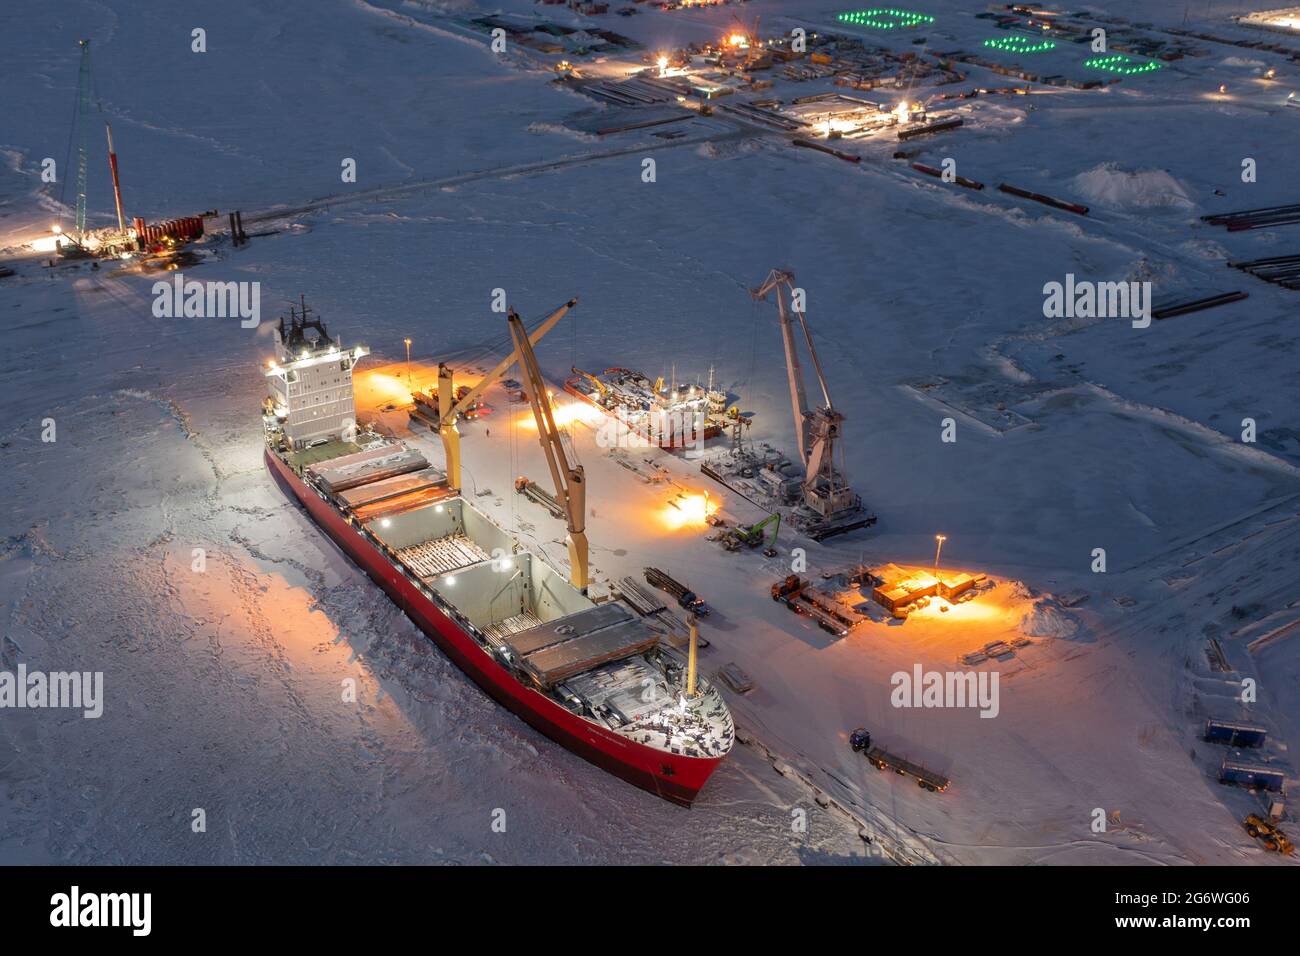 Sabetta, Tyumen region, Russia - December 07, 2020:The ship is engaged in cargo operations at the berth. The ship is frozen into the ice. Stock Photo